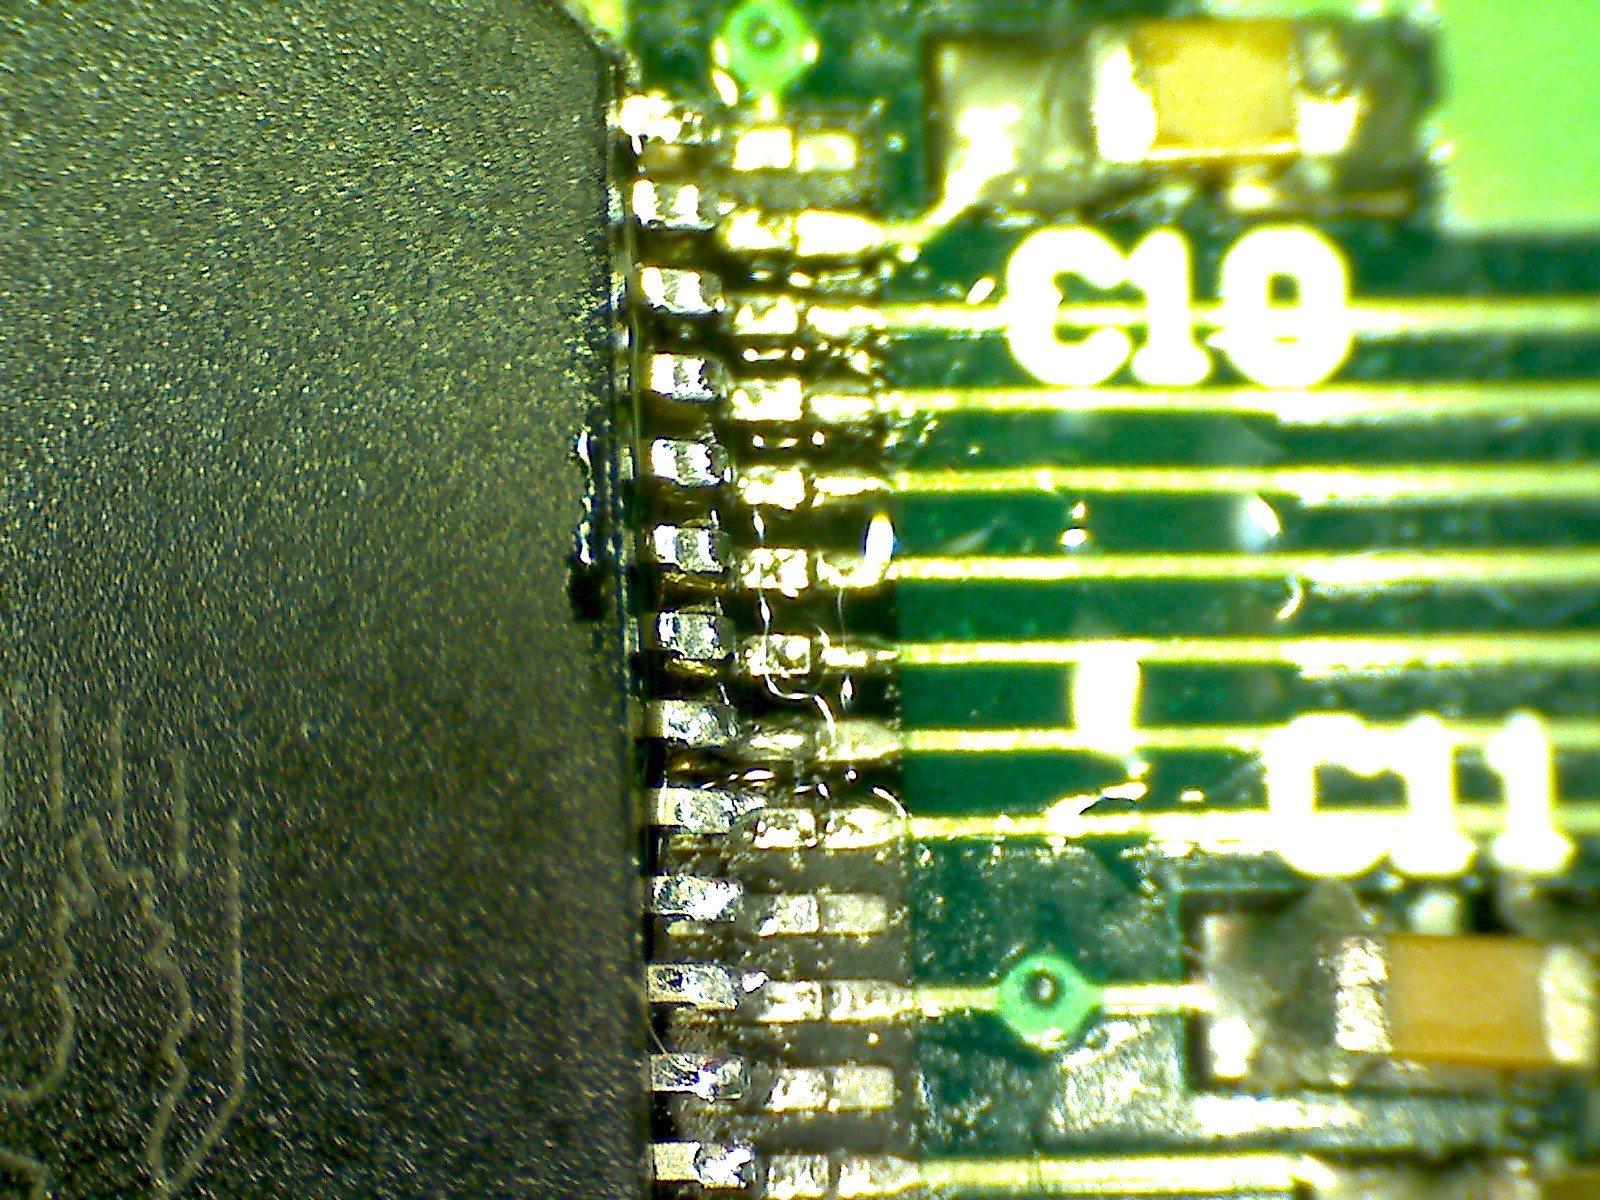 Flux residue ontop of some microcontroller pins.